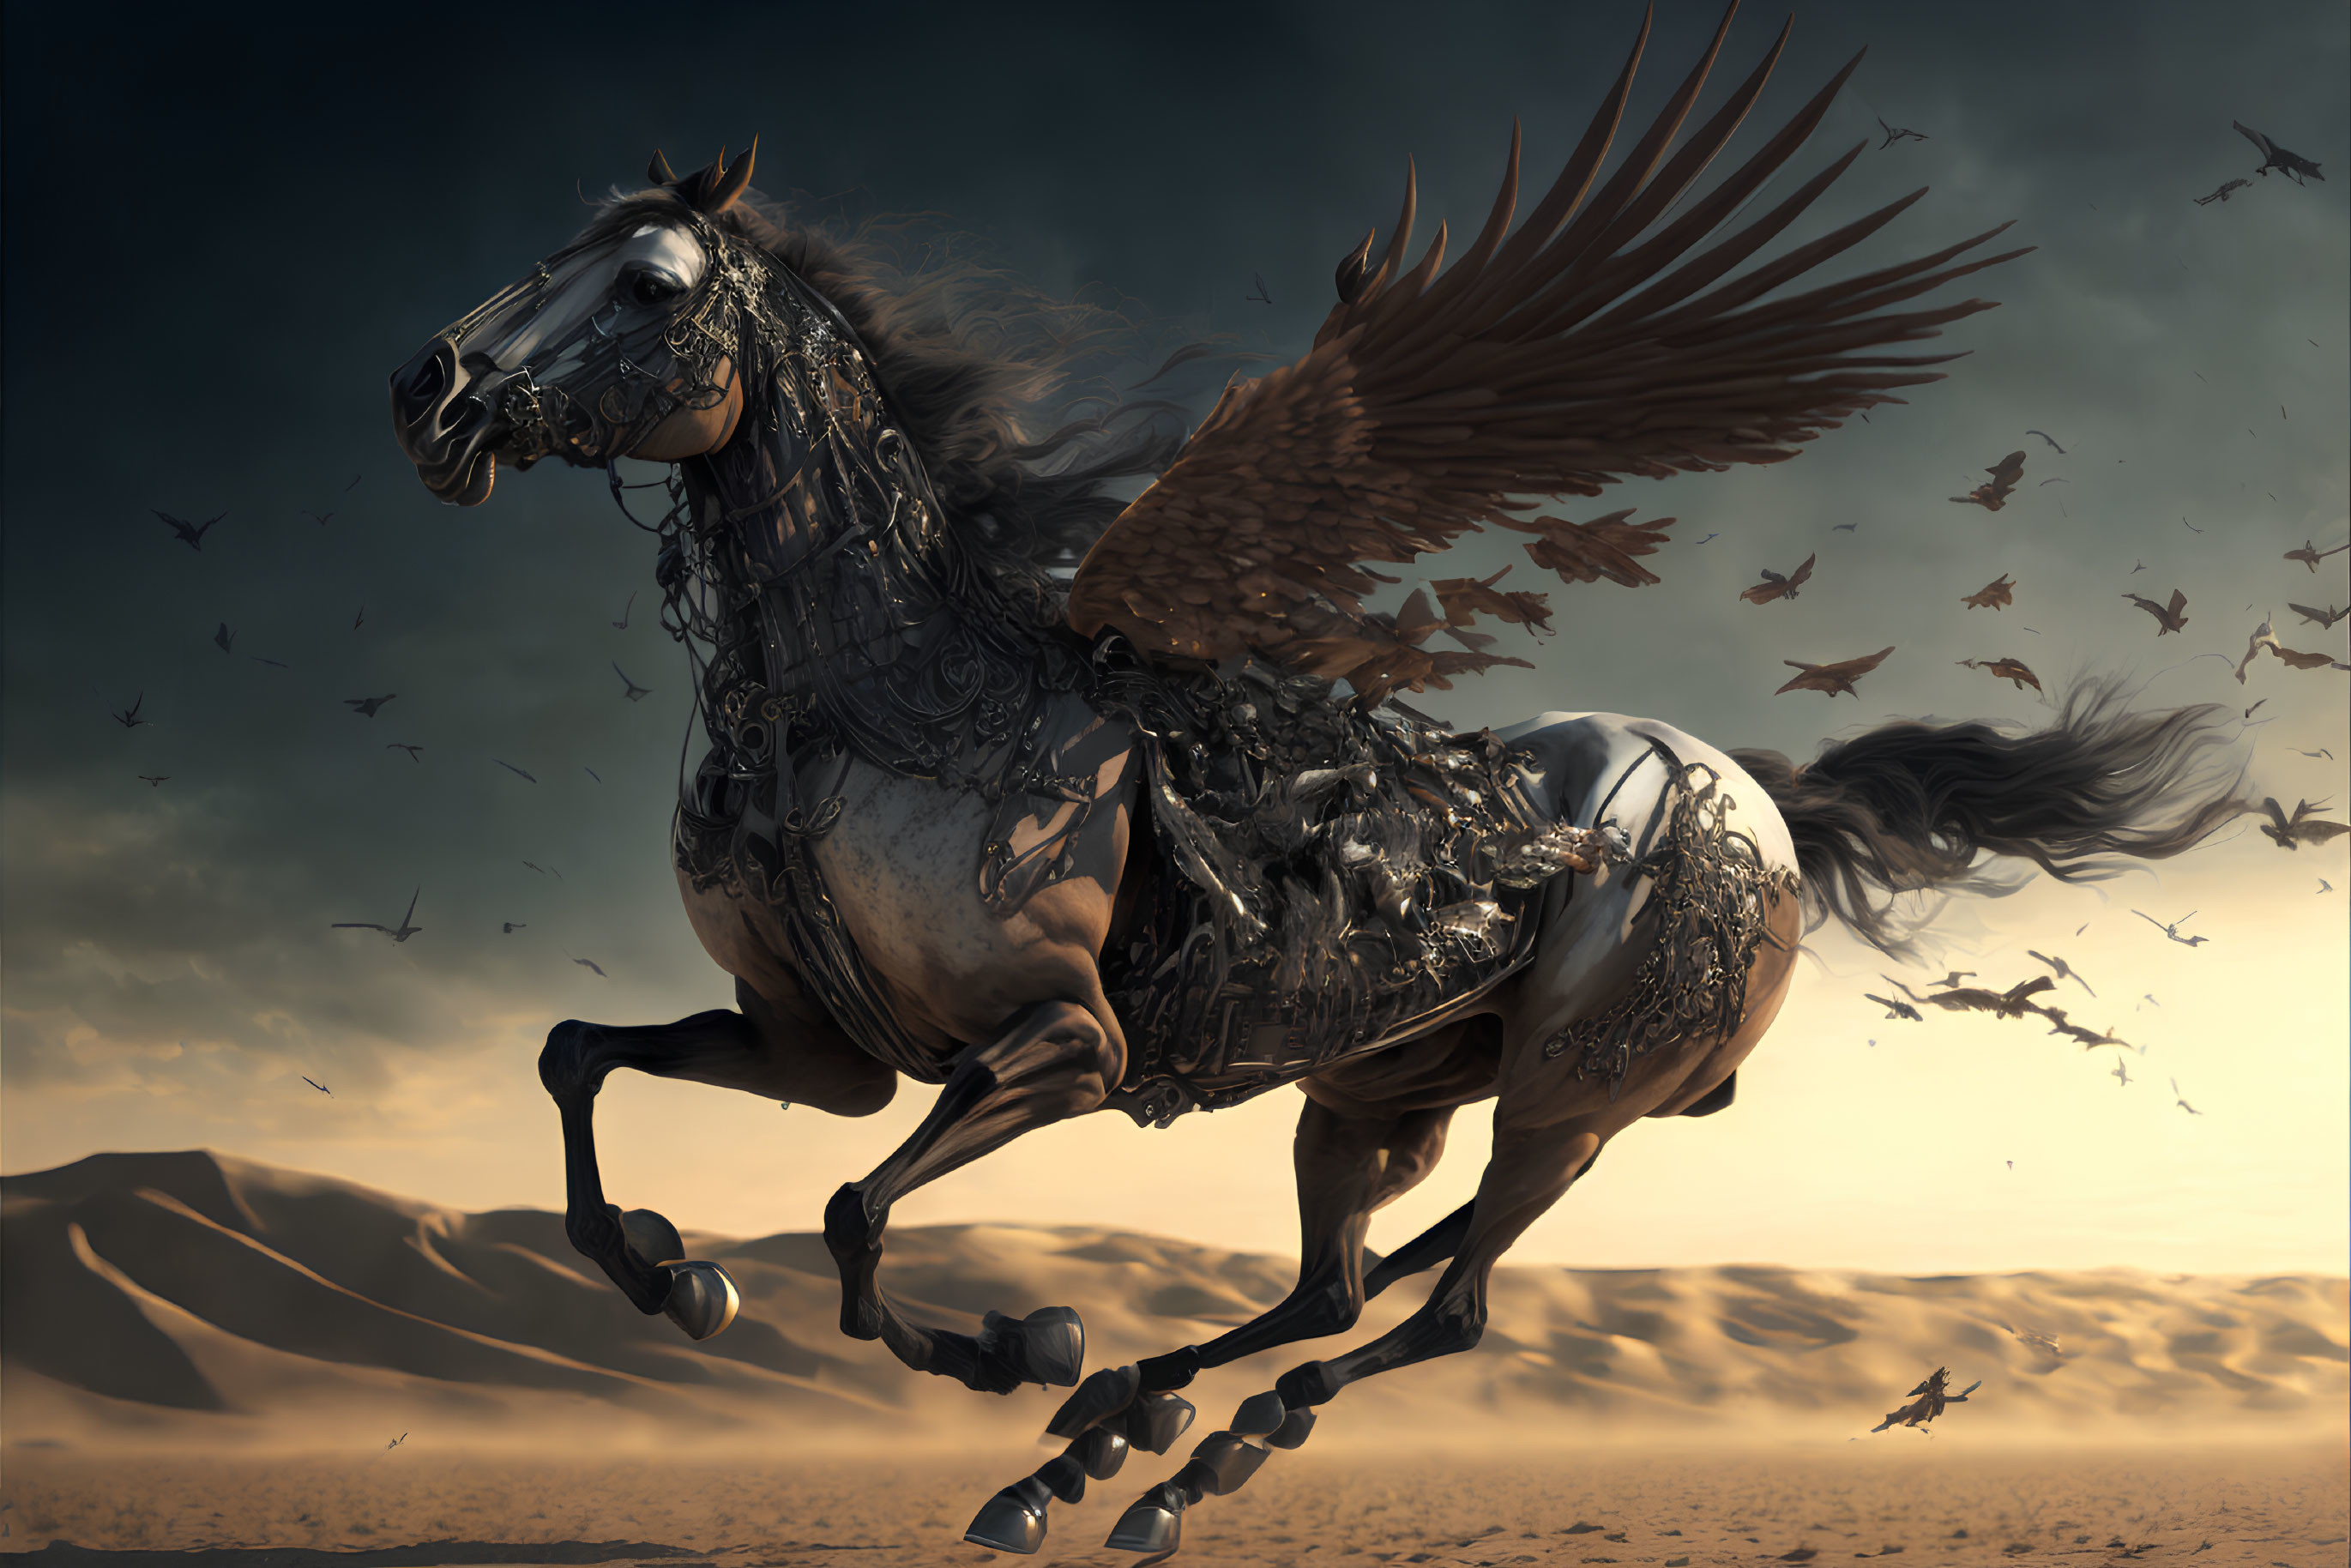 Mechanical winged horse in desert landscape with birds.